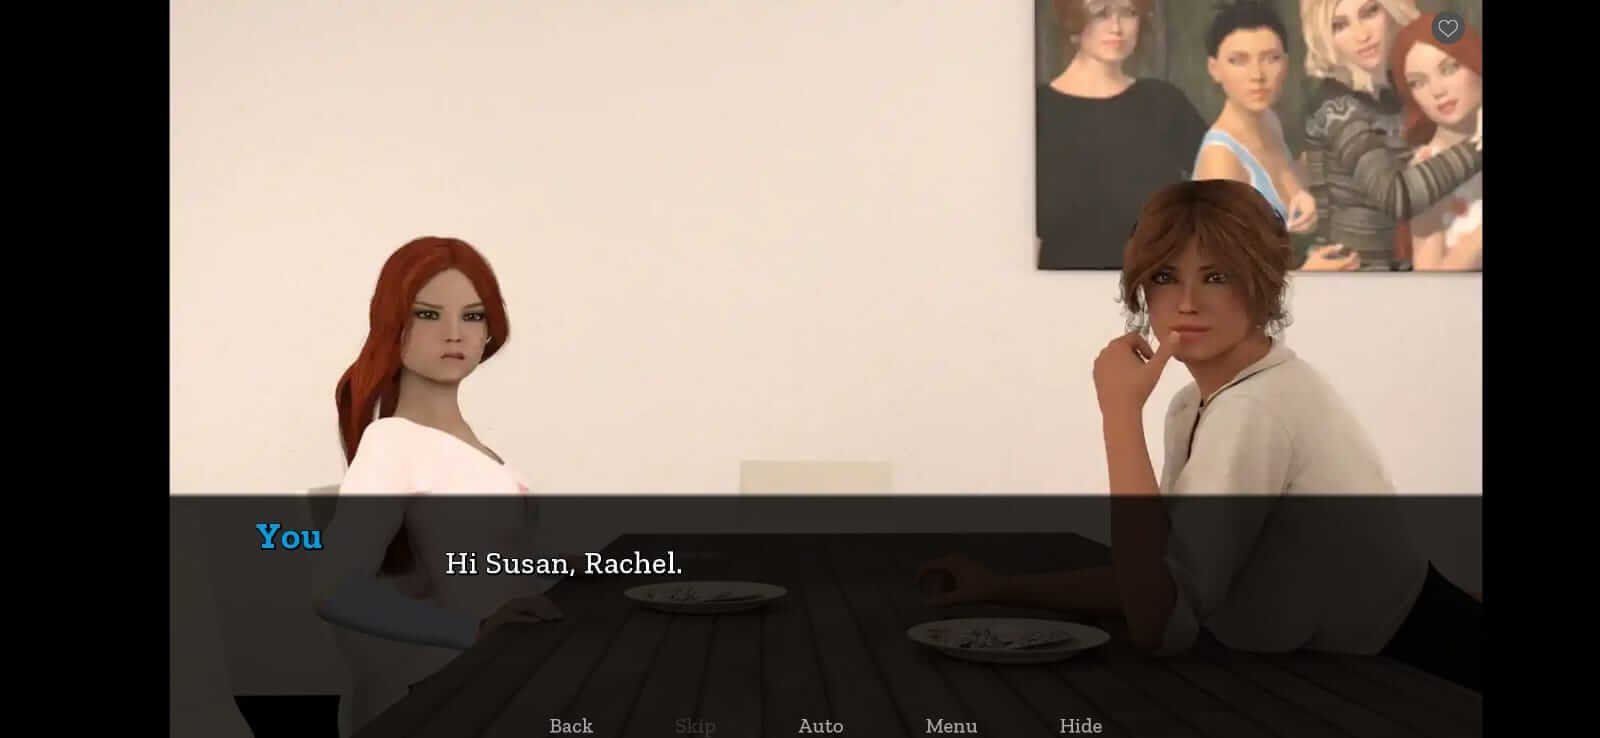 download-sisterly-lust-apk-v1-1-11-for-android-latest